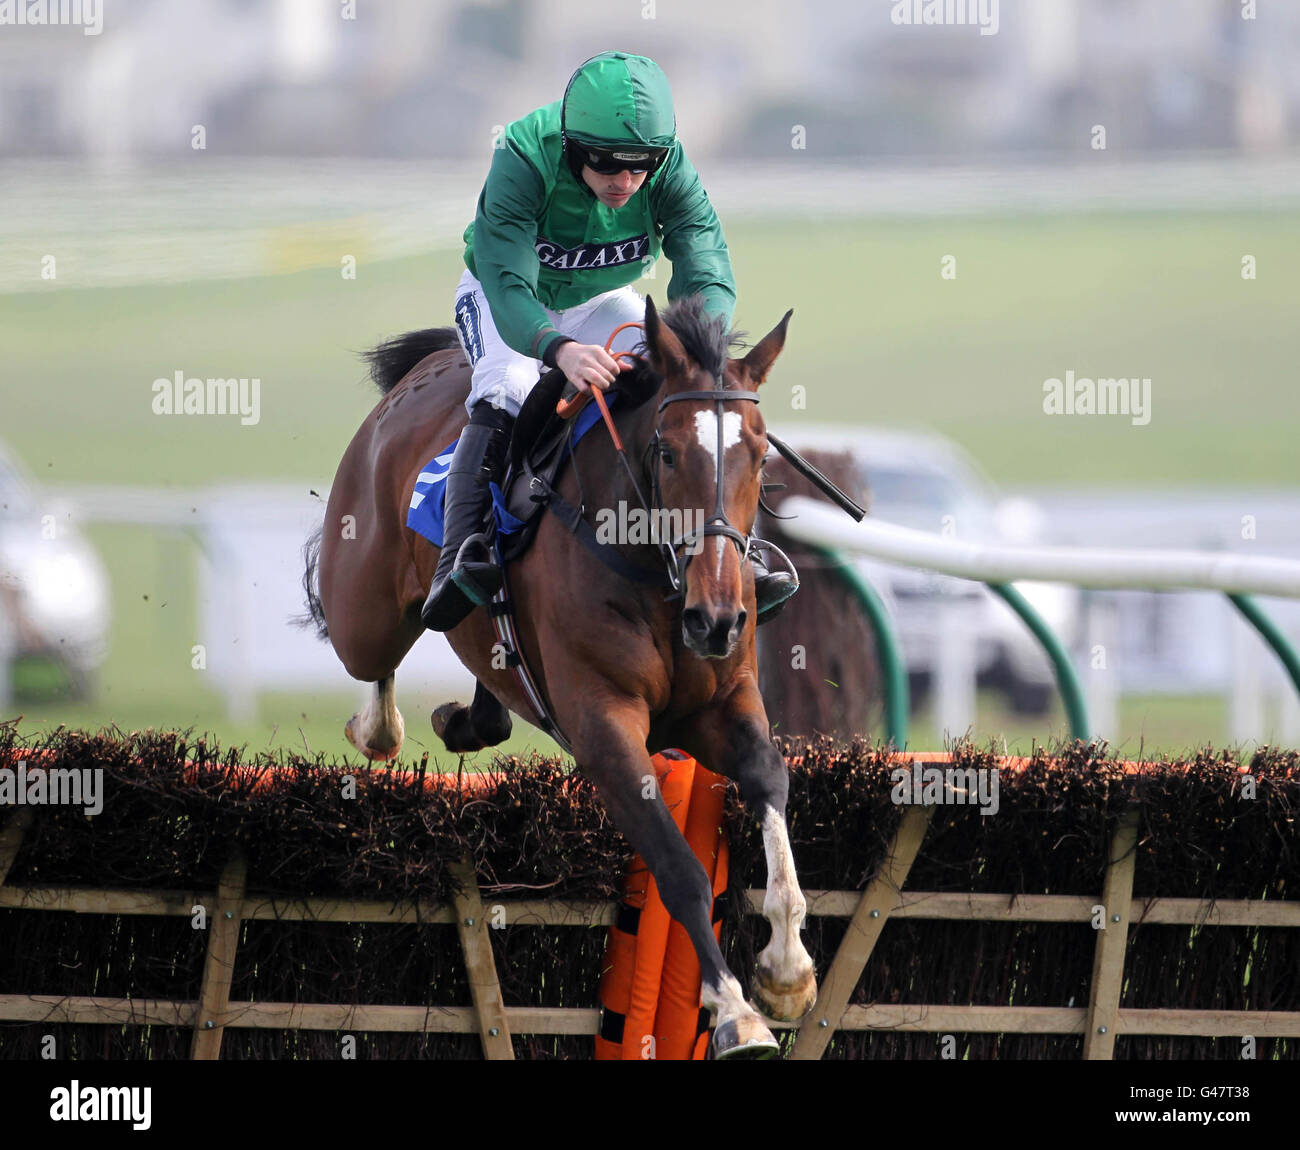 Tonic Mellysse ridden by R Walsh wins The West Sound Juvenile Hurdle Race during day one of the Coral Scottish Grand National Festival at Ayr Racecourse. Stock Photo